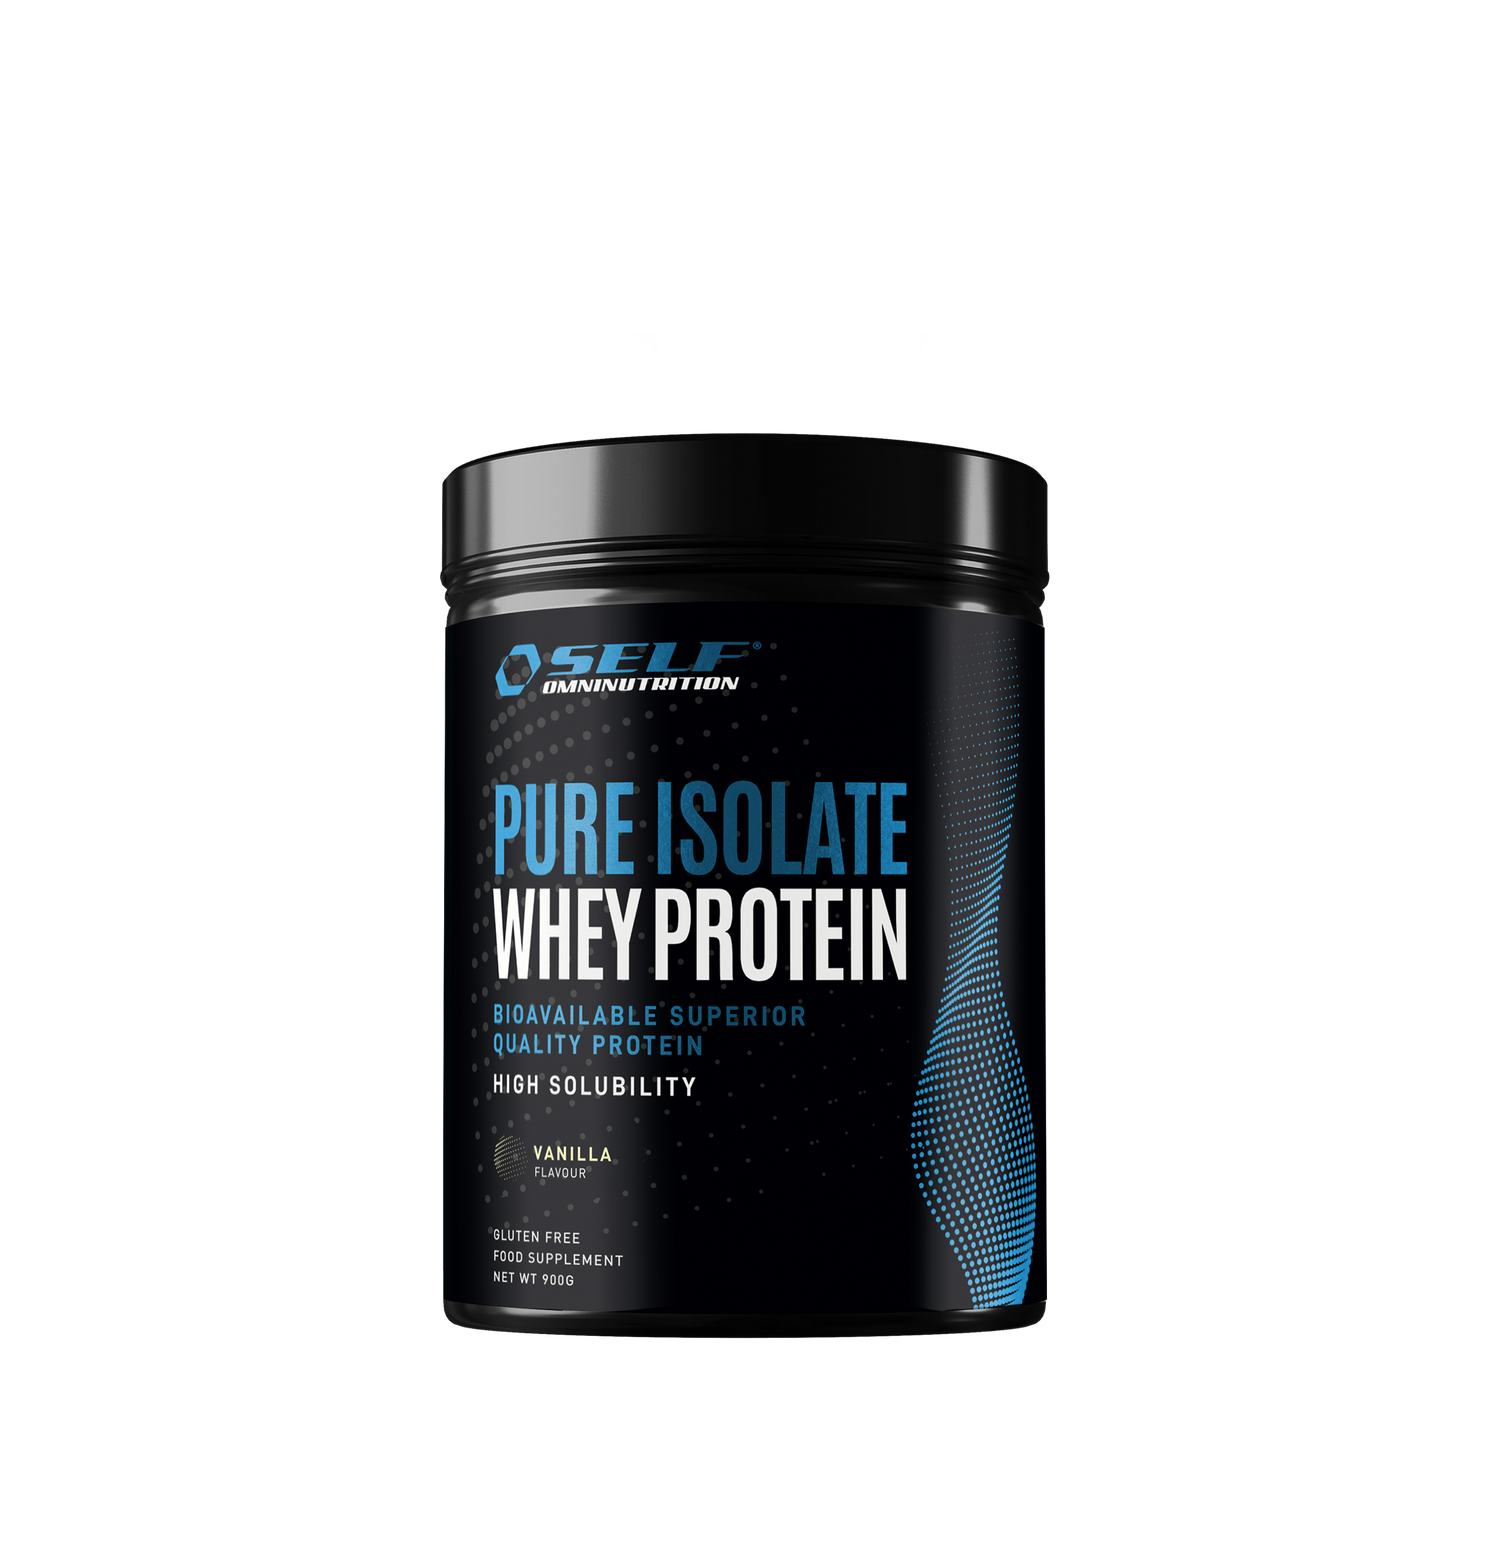 Pure Isolate Whey Protein